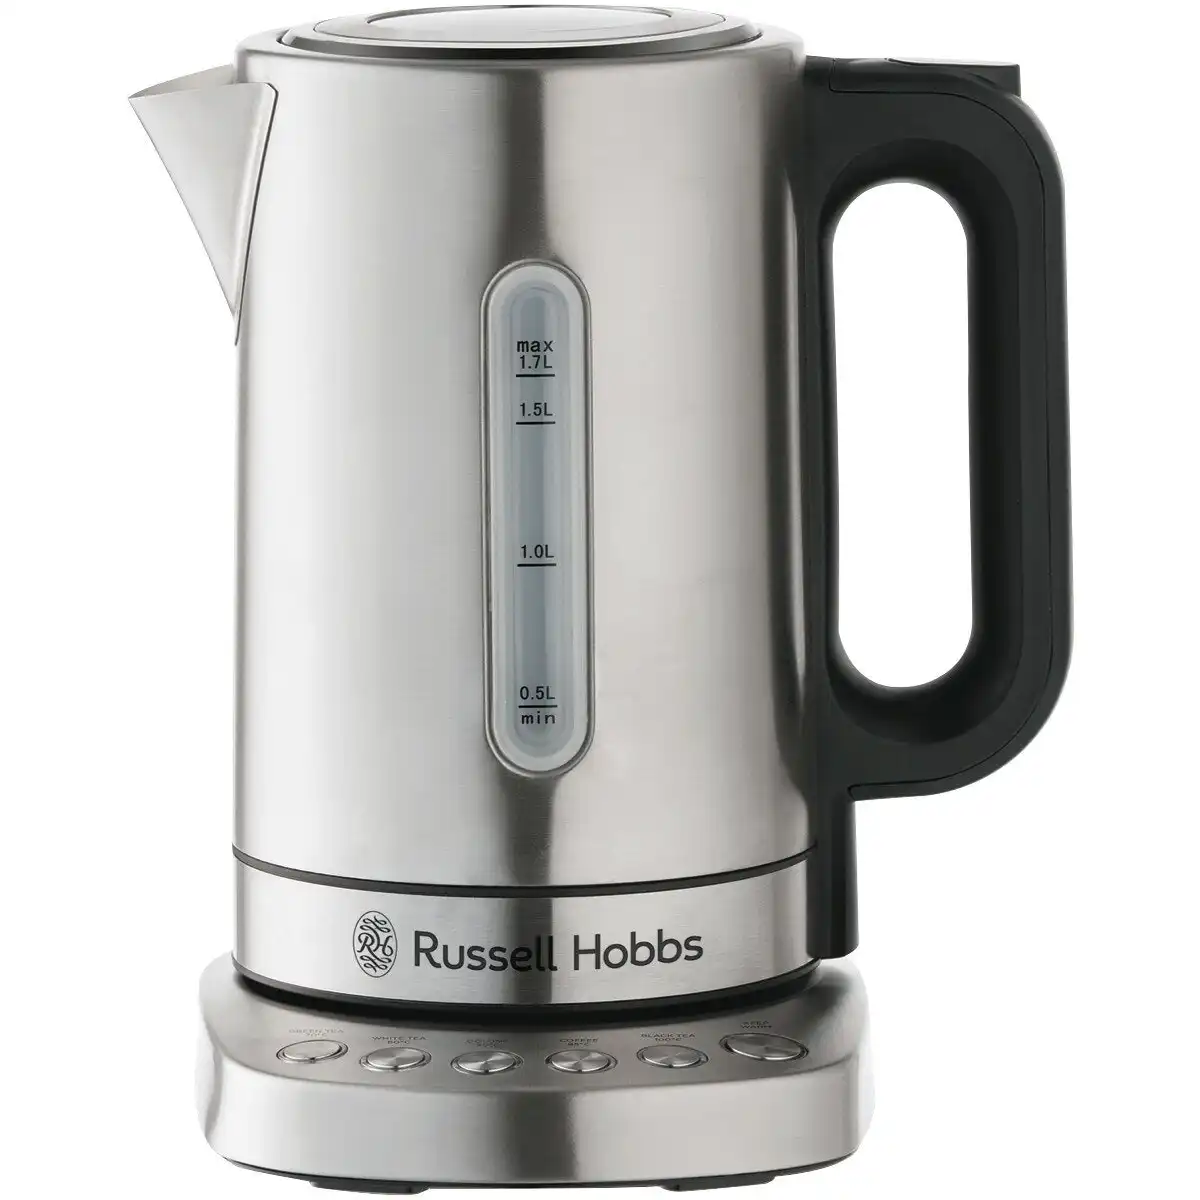 Russell Hobbs Addison Digital 1.7L Kettle - Brushed Stainless Steel